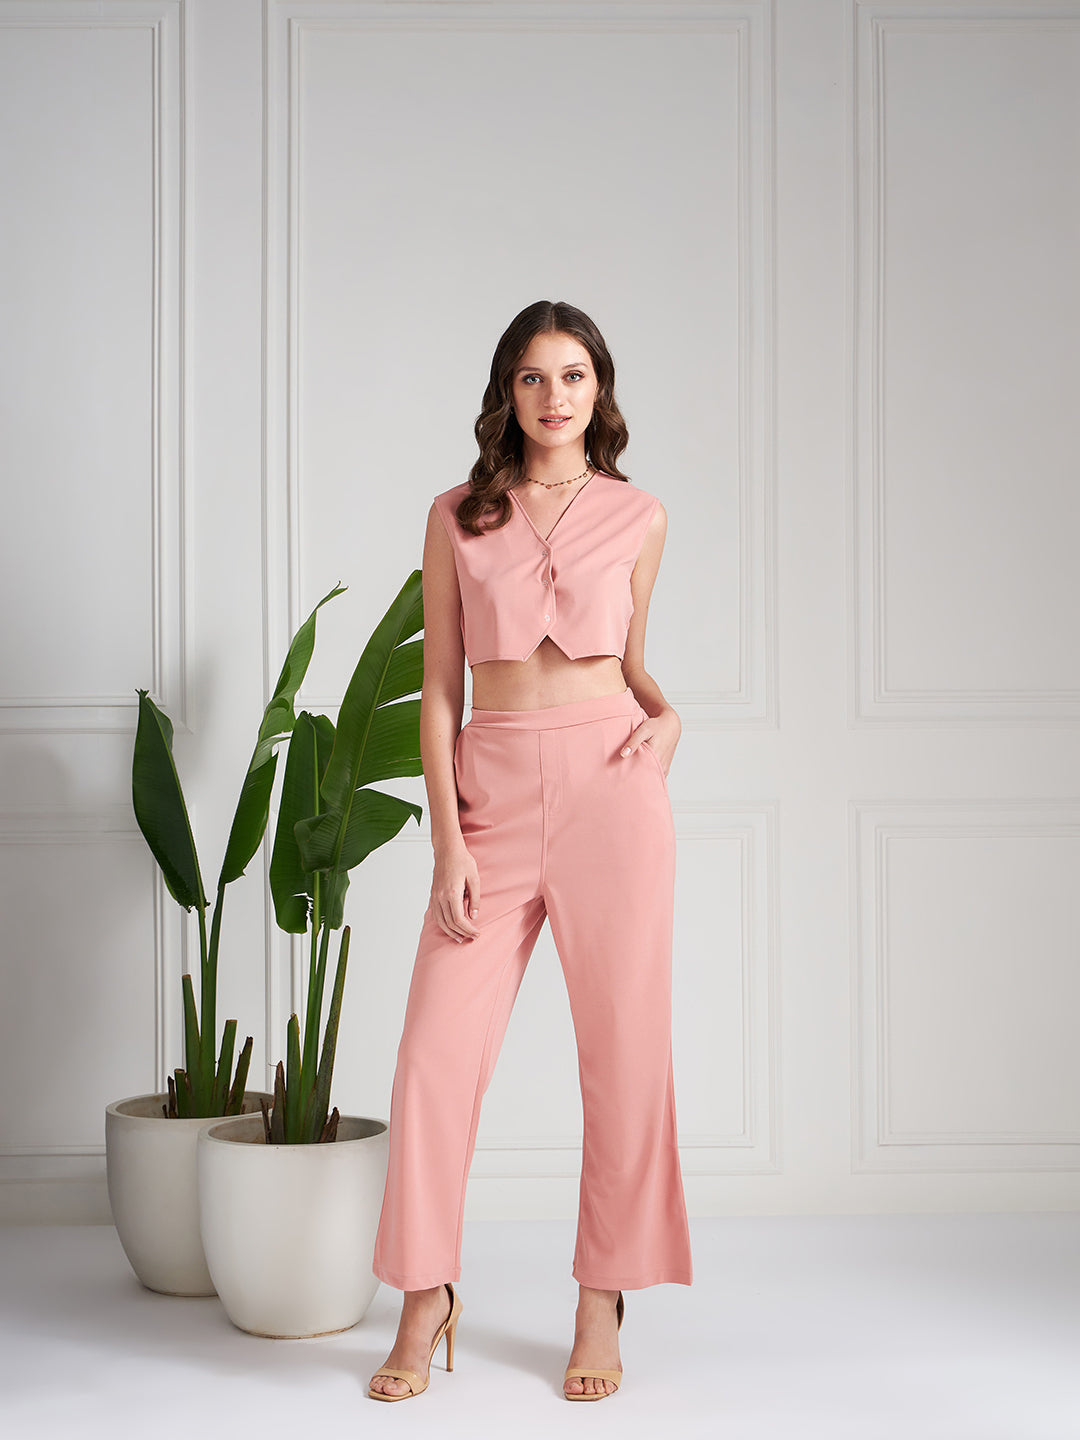 Athena V-Neck Crop Top With Trousers Co-Ords - Athena Lifestyle